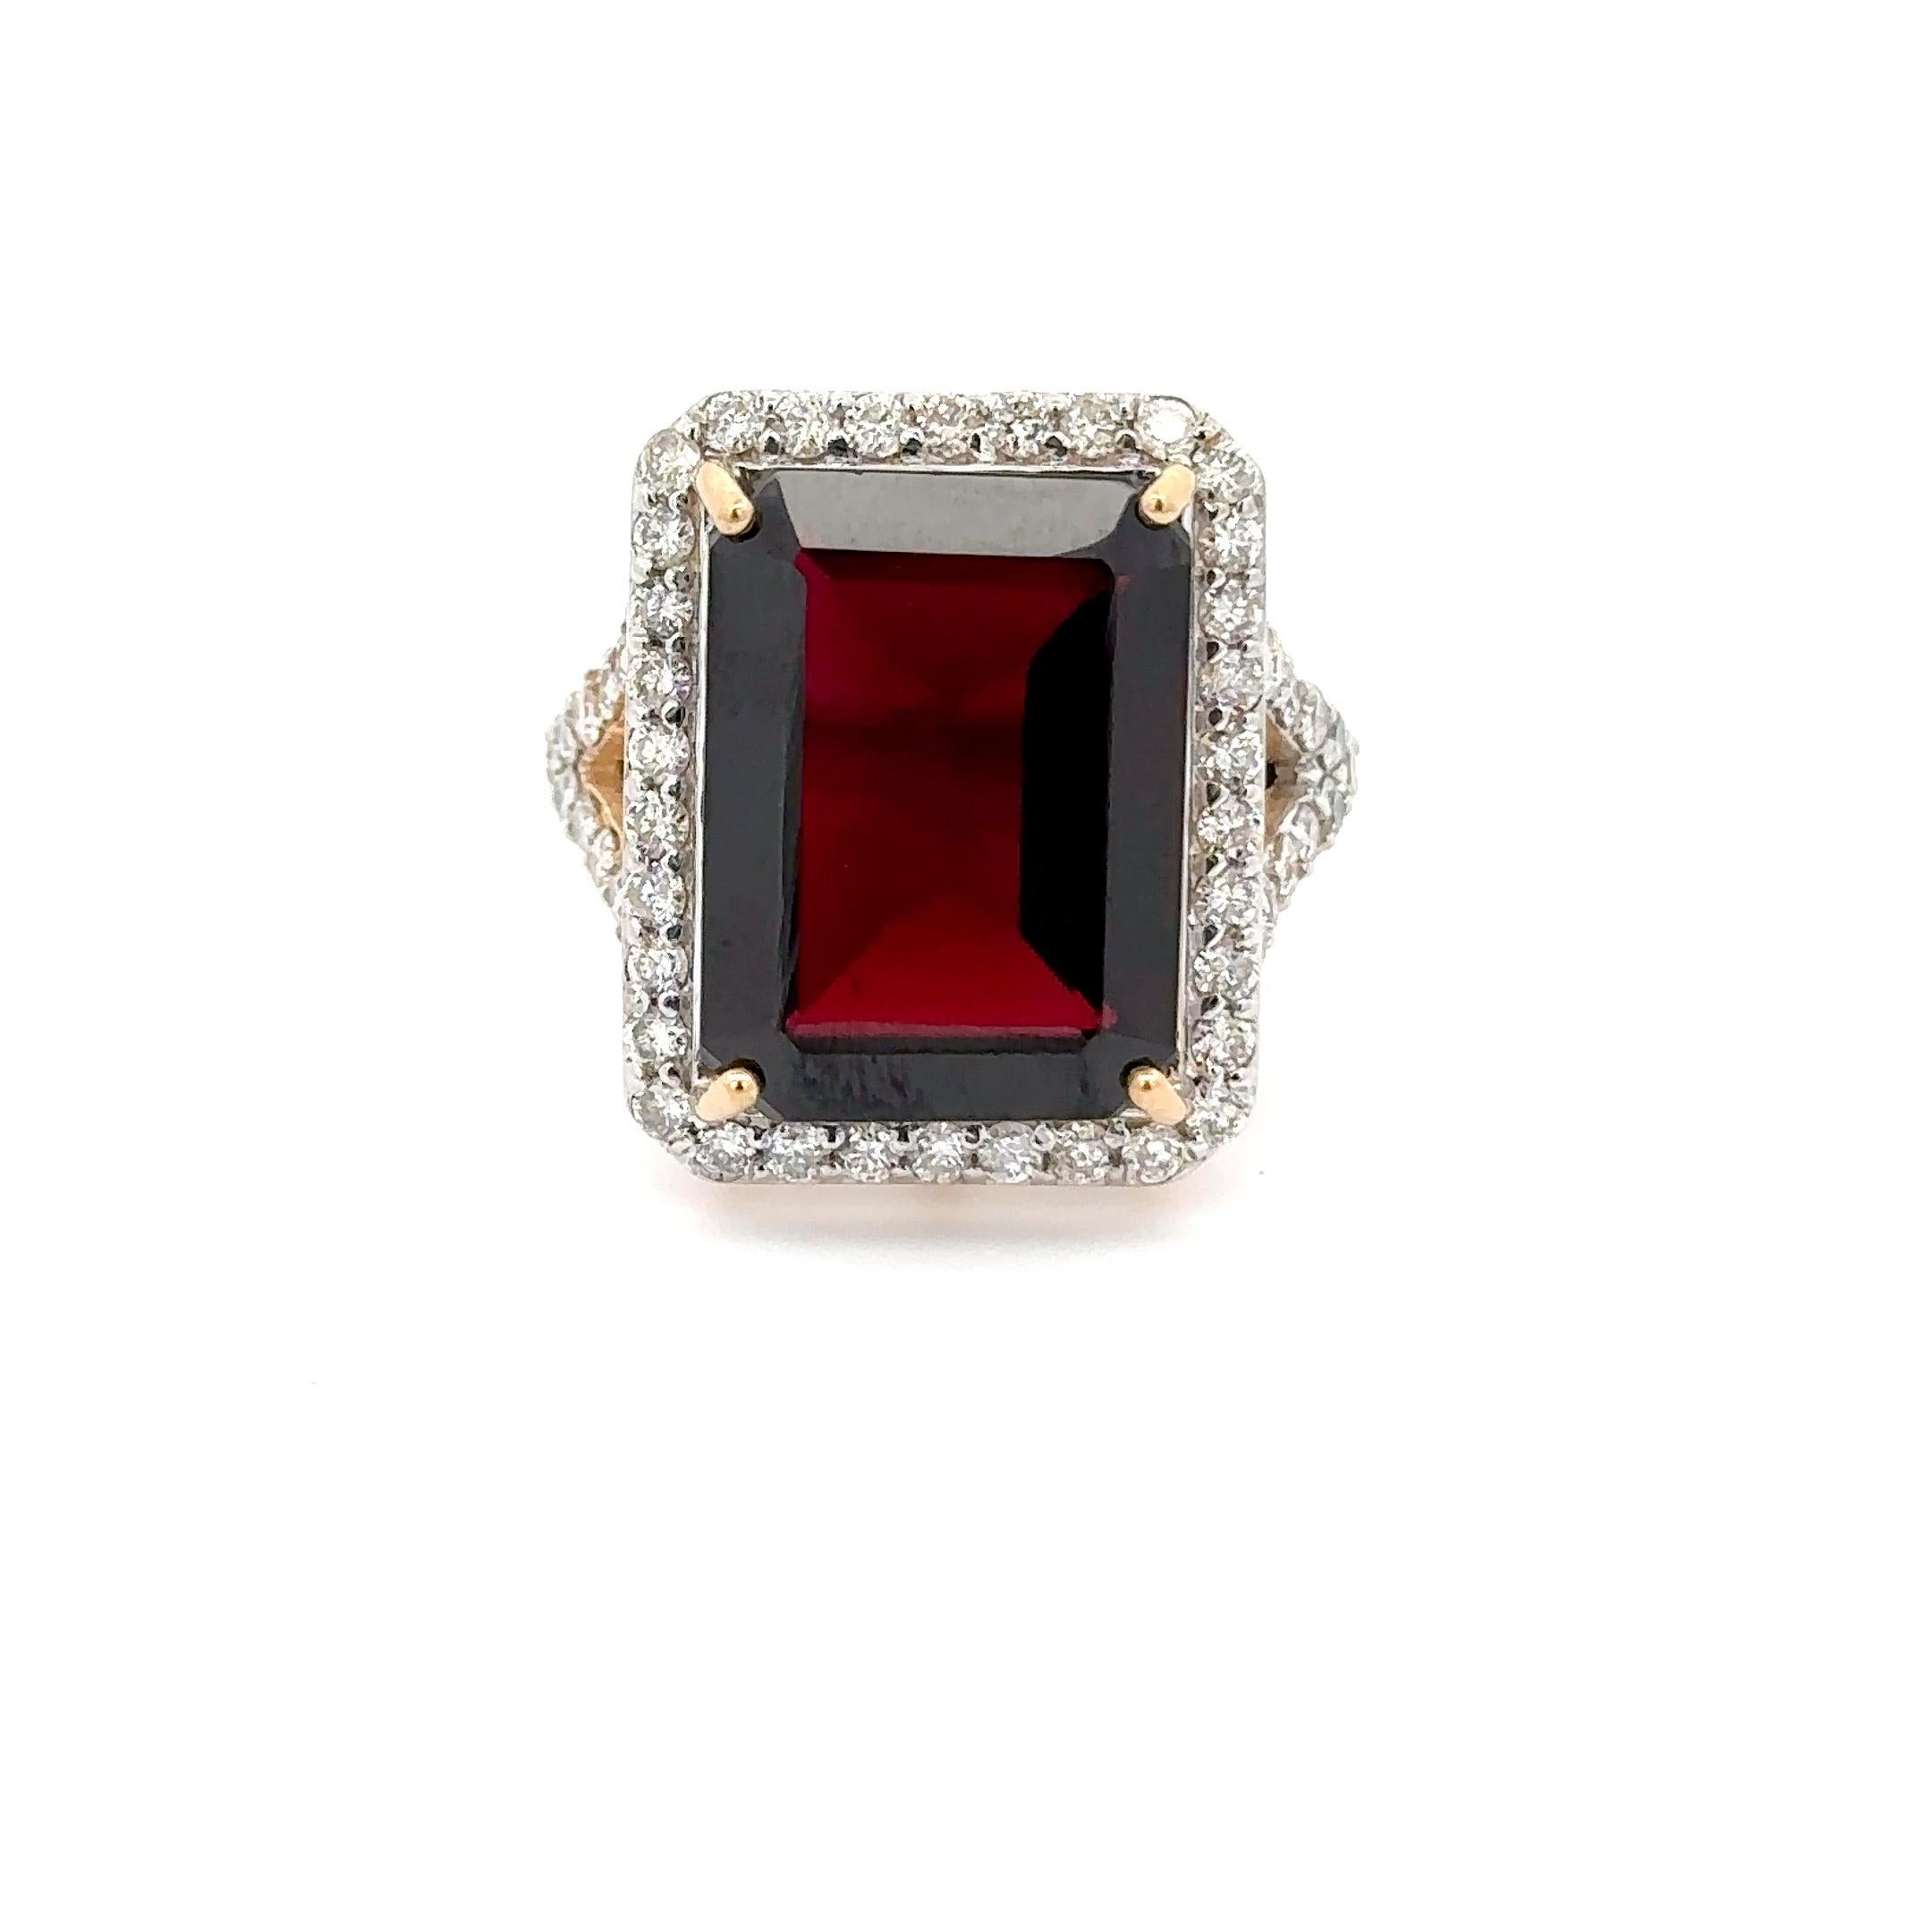 For Sale:  Large 14.54 Ct Garnet Diamond Cocktail Ring in 14k Solid Yellow Gold Certified 4